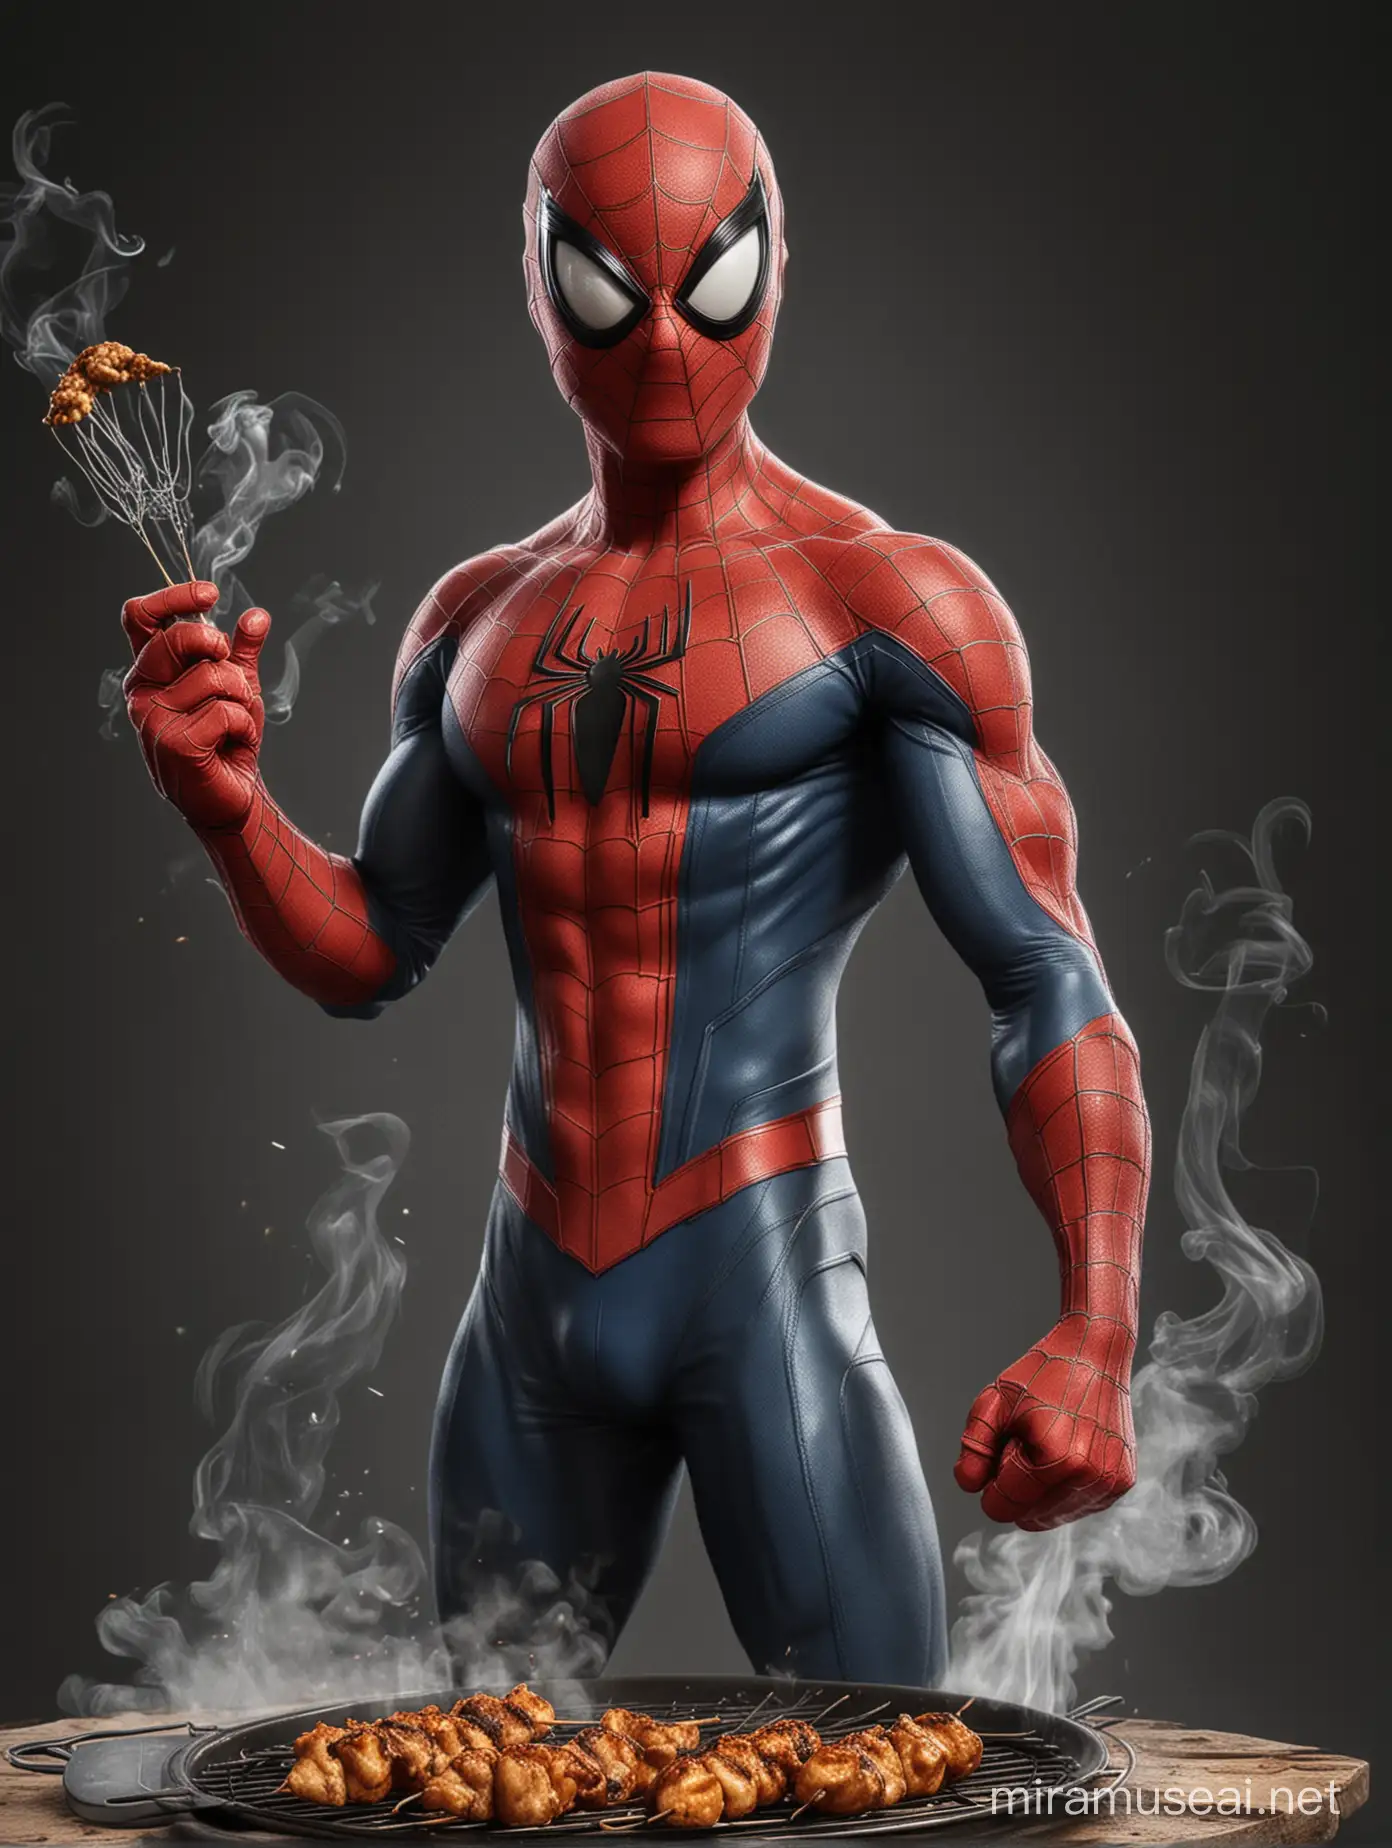 Spiderman Caricature Grilling Satay with Dramatic Smoke Effect